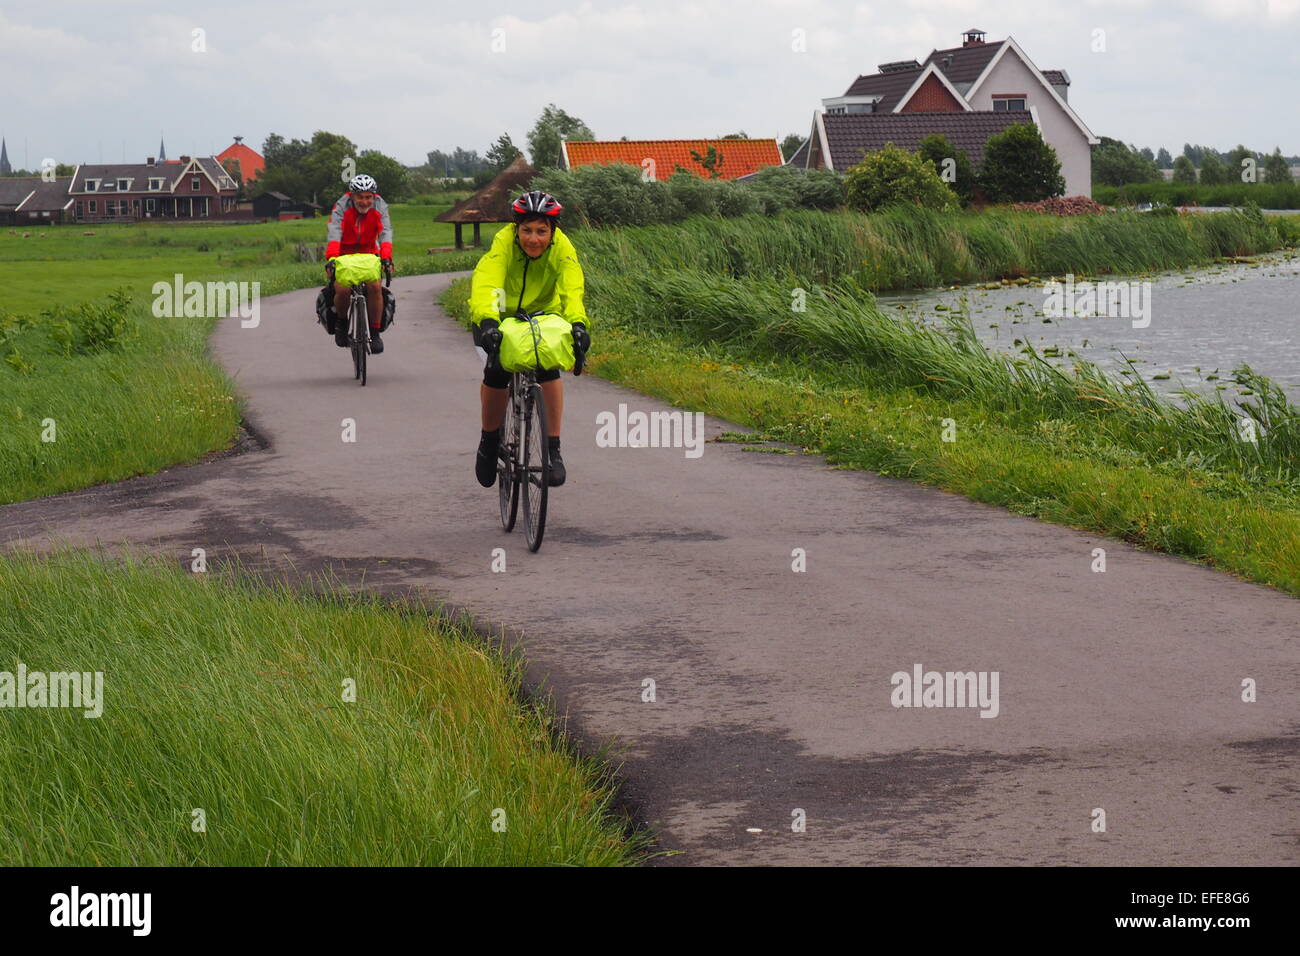 Two cyclists cycling on a bike path along the Amstel River on the outskirts of Amsterdam. Stock Photo